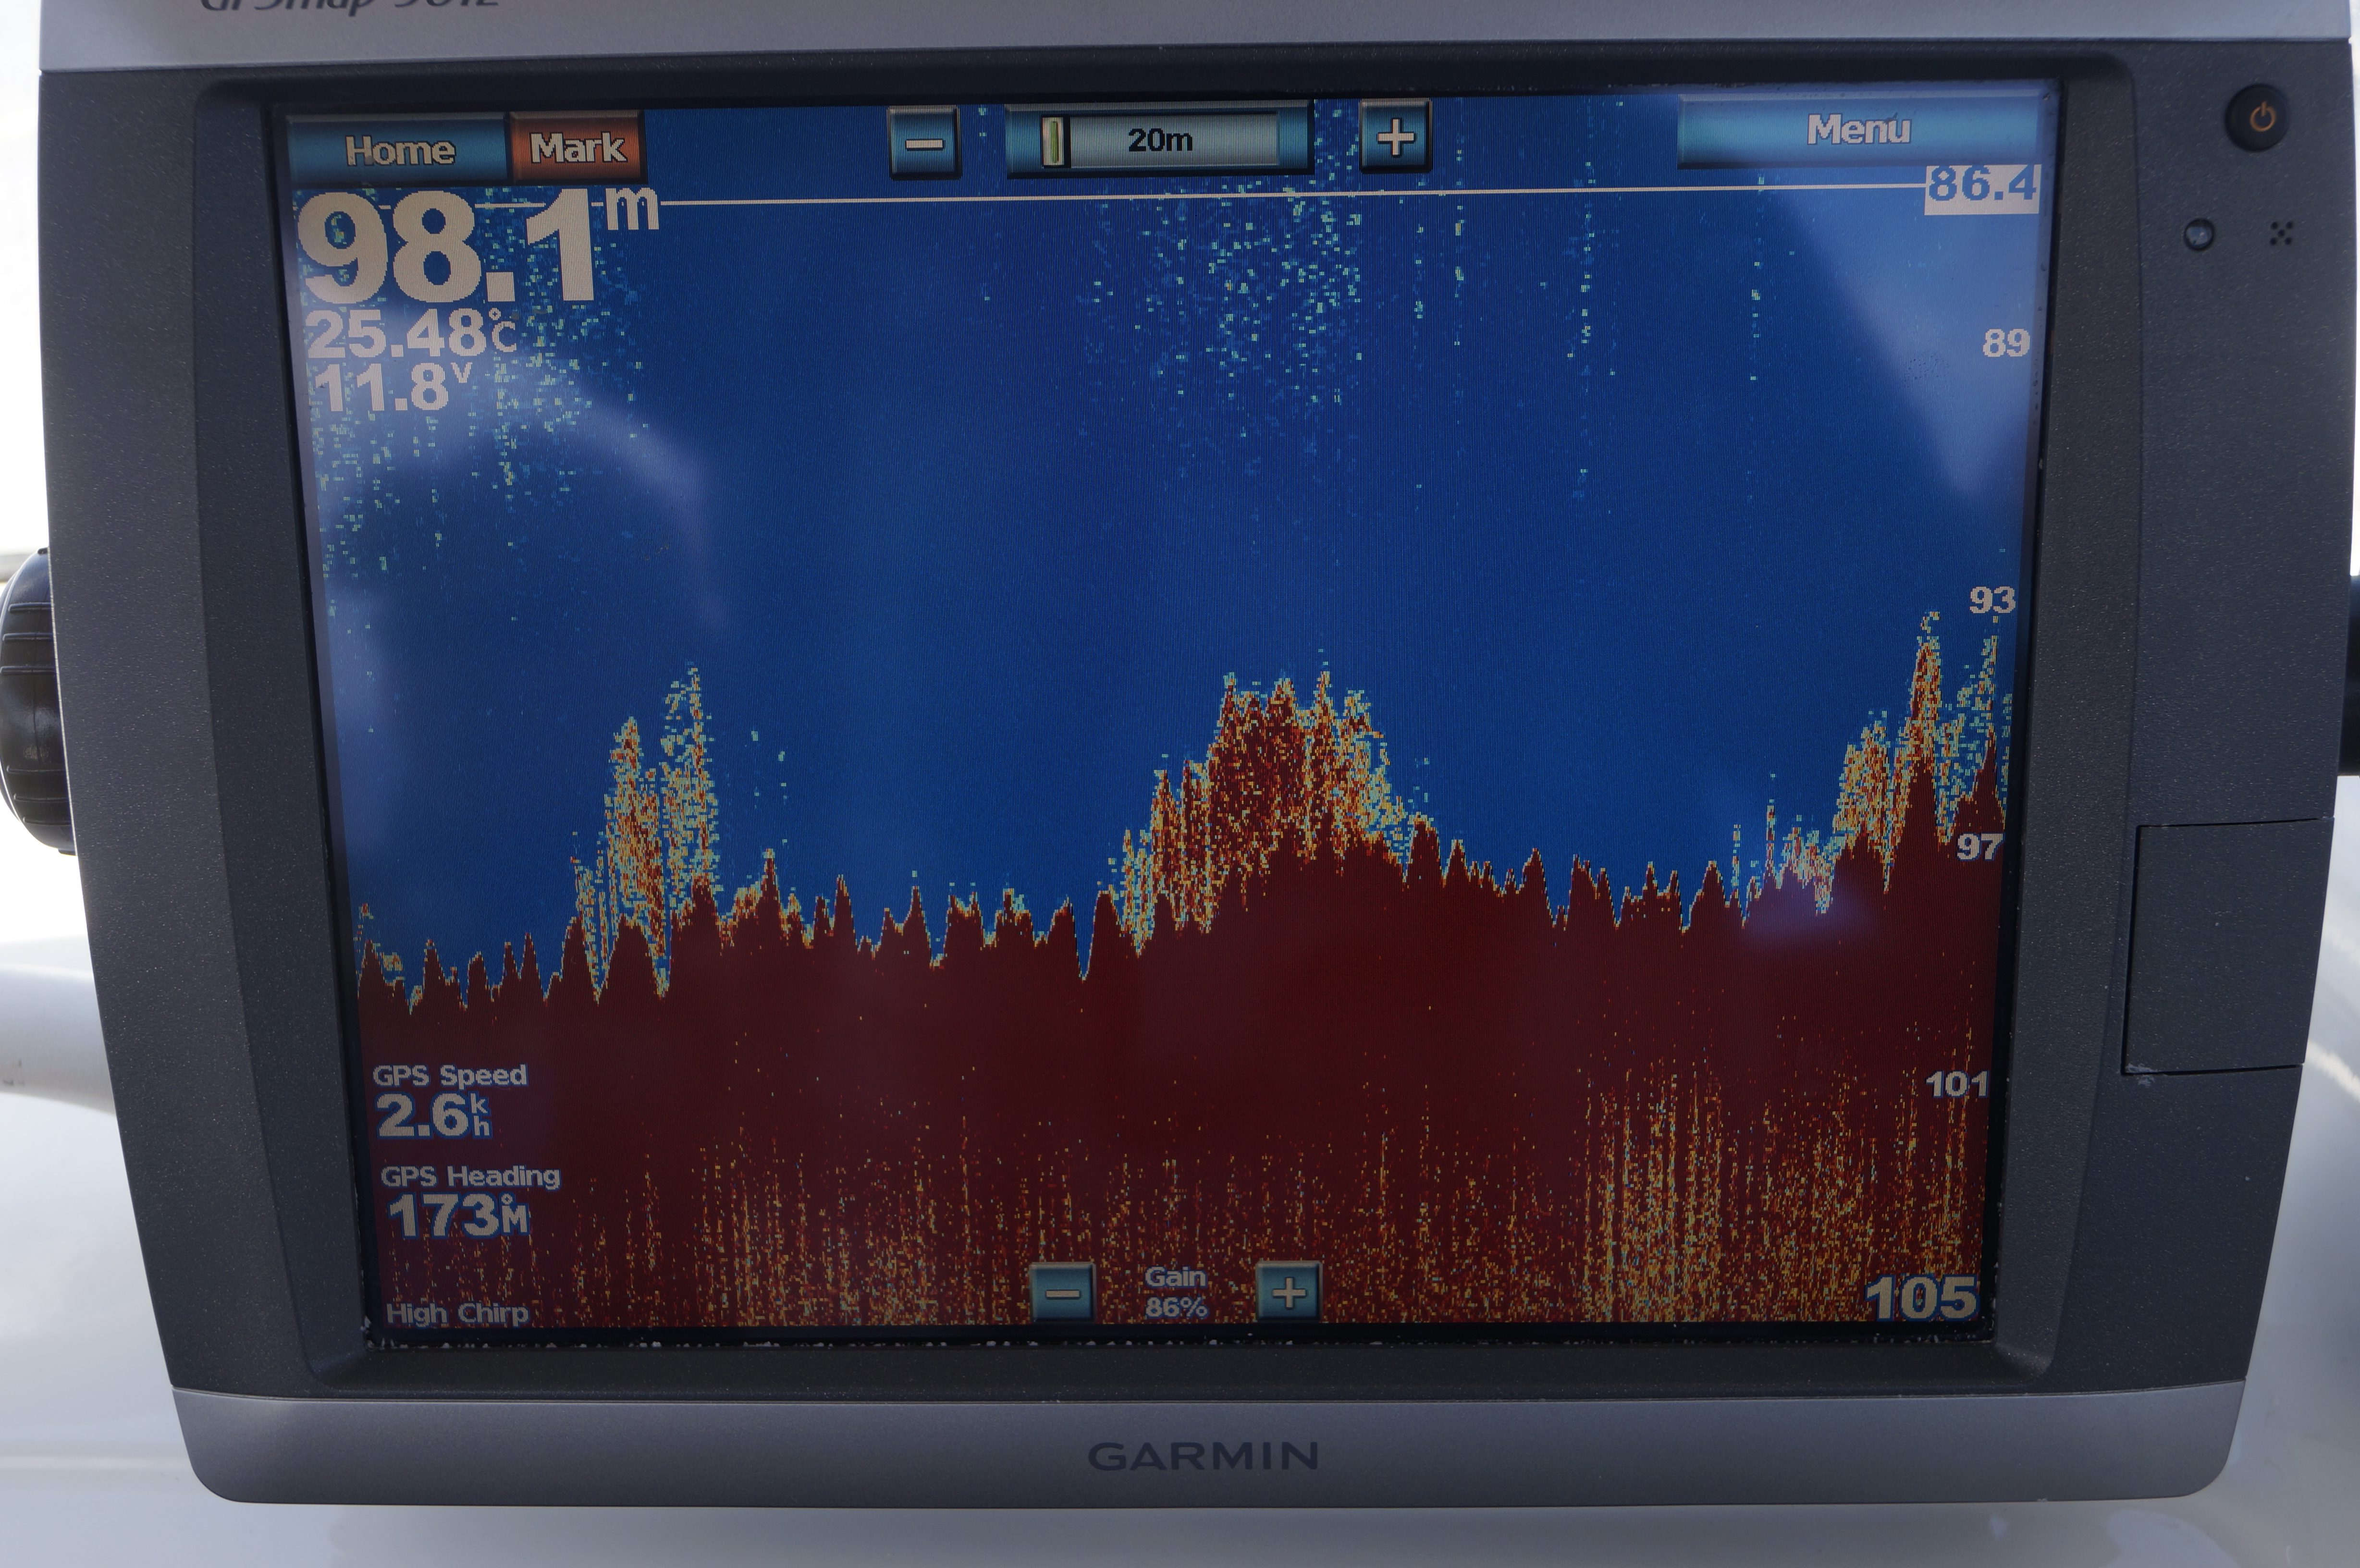 Patches of pearl perch and a bait school found on the Garmin 1kW CHIRP sounder using excess gain for highlighting while drifting the 100m line.